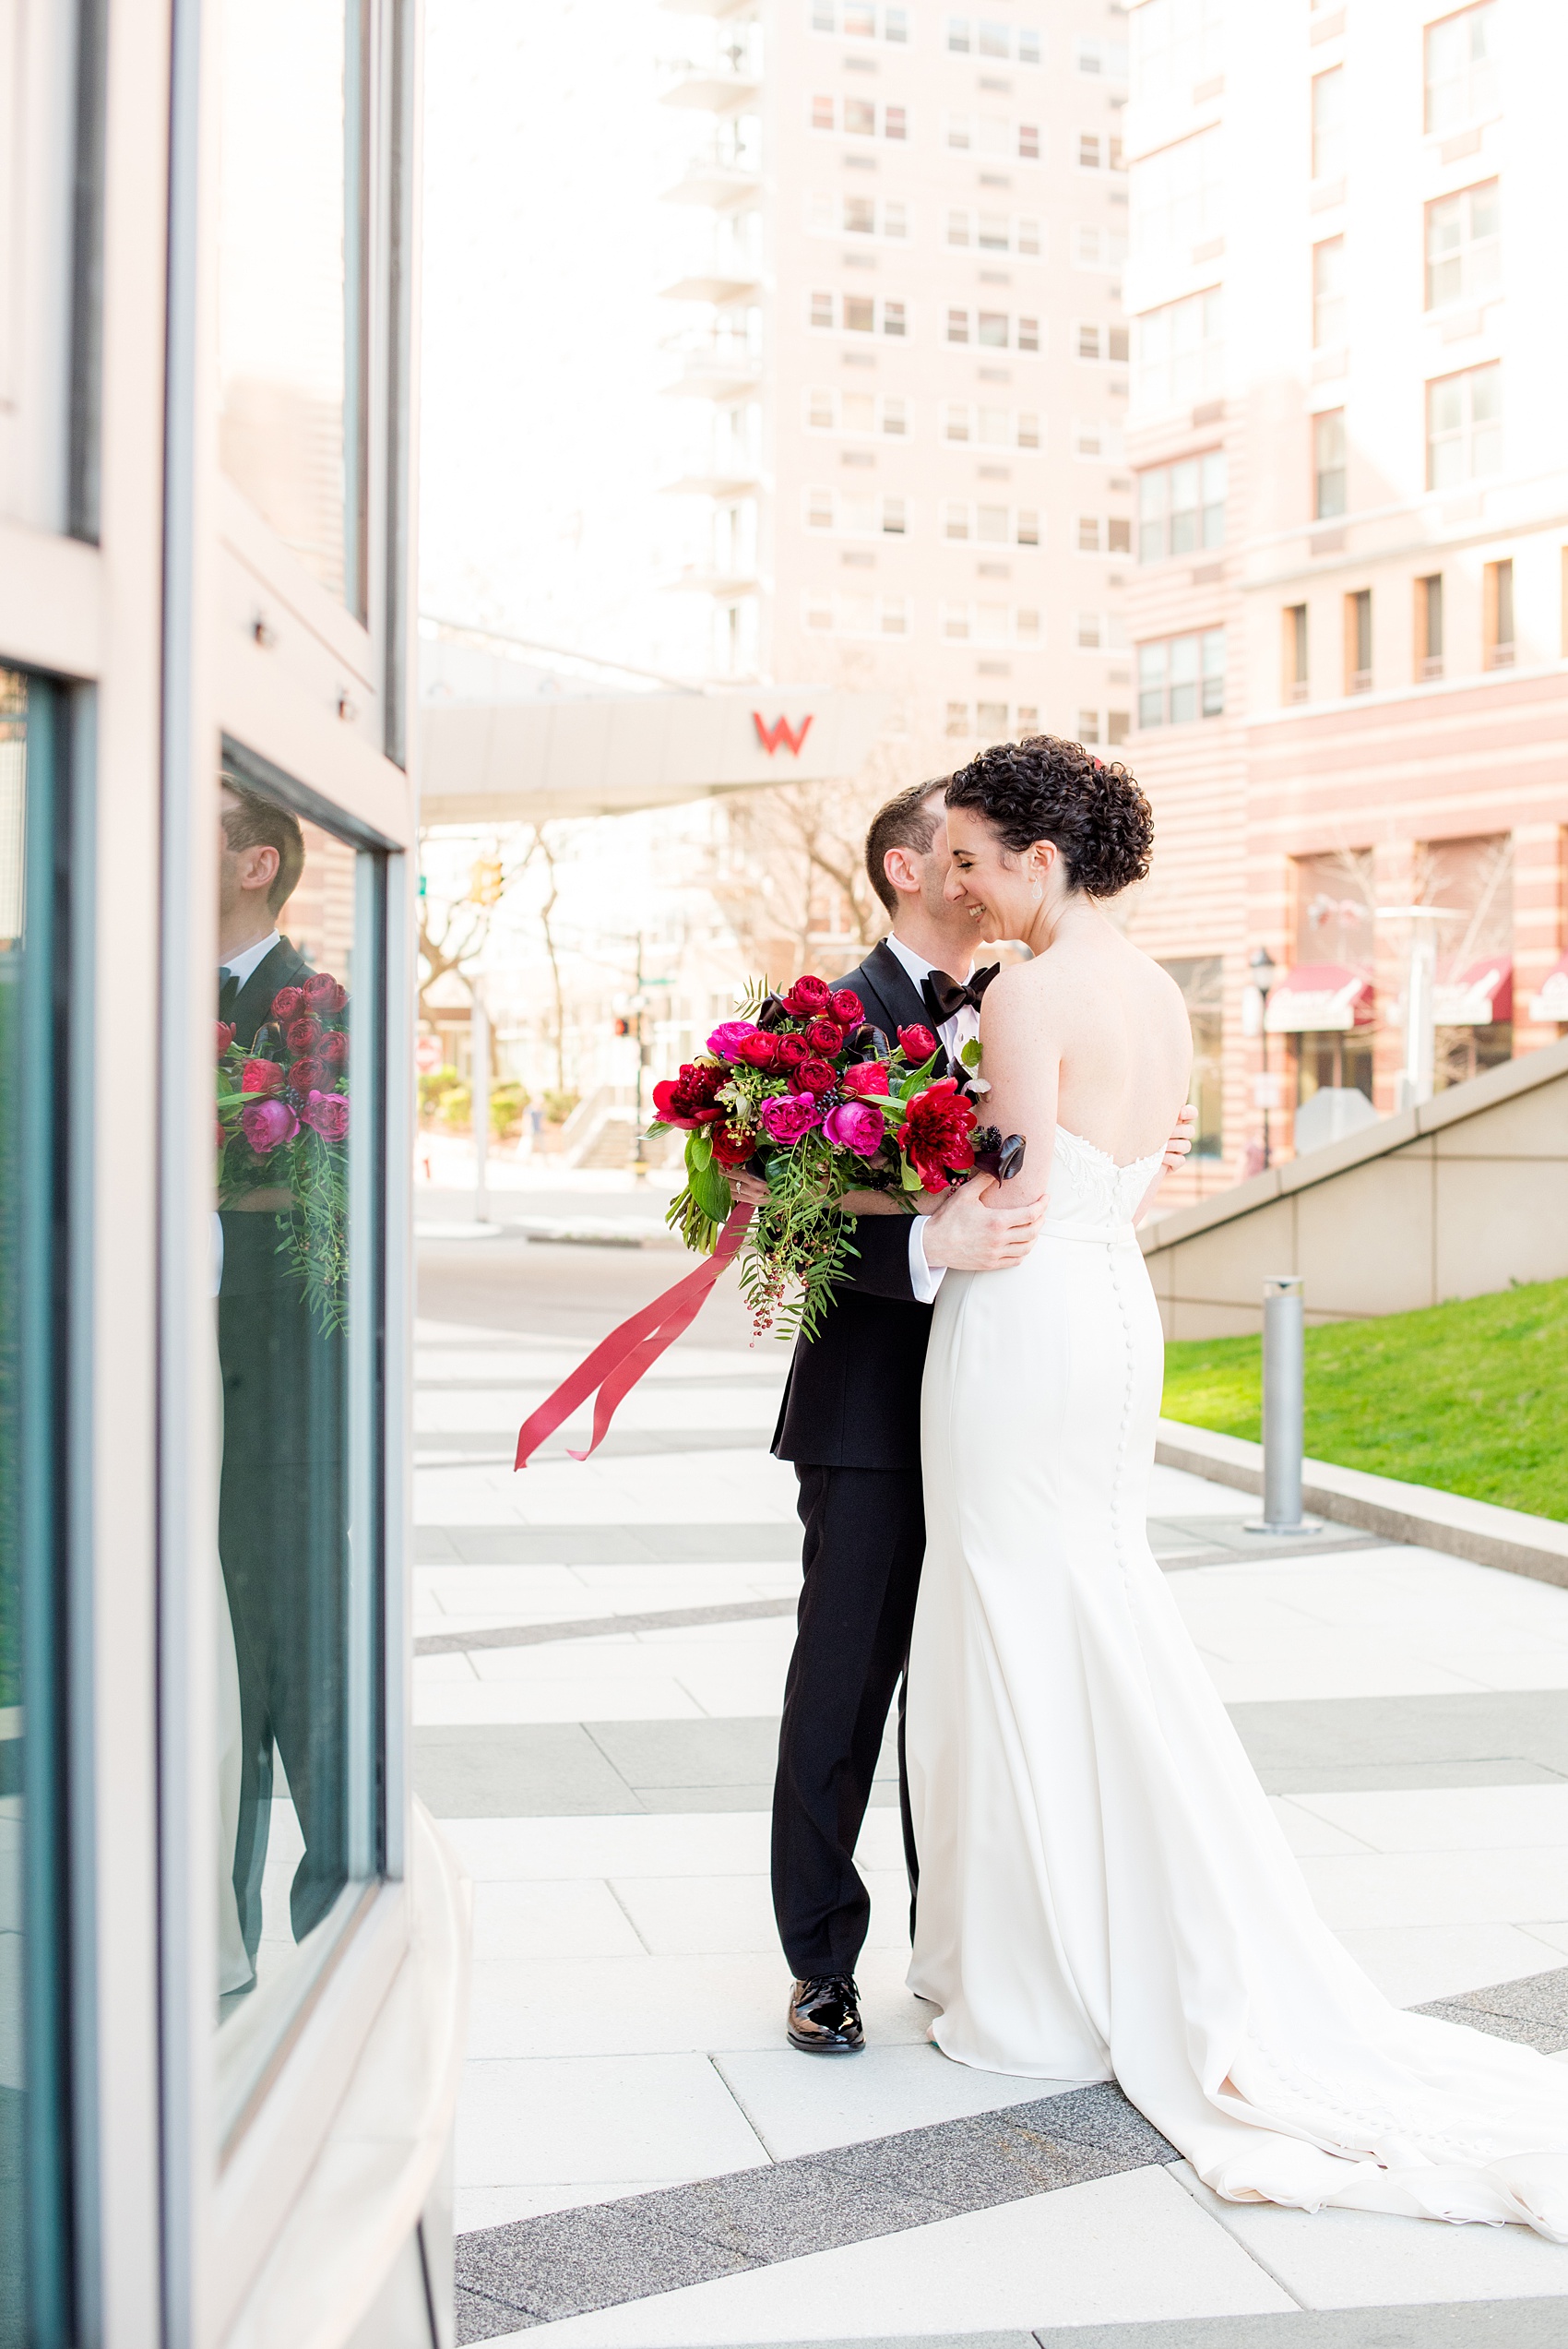 W Hoboken wedding photos by Mikkel Paige Photography. Pictures in this well known New Jersey area with a view of the Manhattan skyline. The groom and bride shared their first look outside of the venue. #mikkelpaige #HobokenWedding #NewJerseyPhotographer #NewYorkCityPhotographer #NYCweddingphotographer #brideandgroomphotos #redpeonies #romanticwedding #springwedding #CityWedding